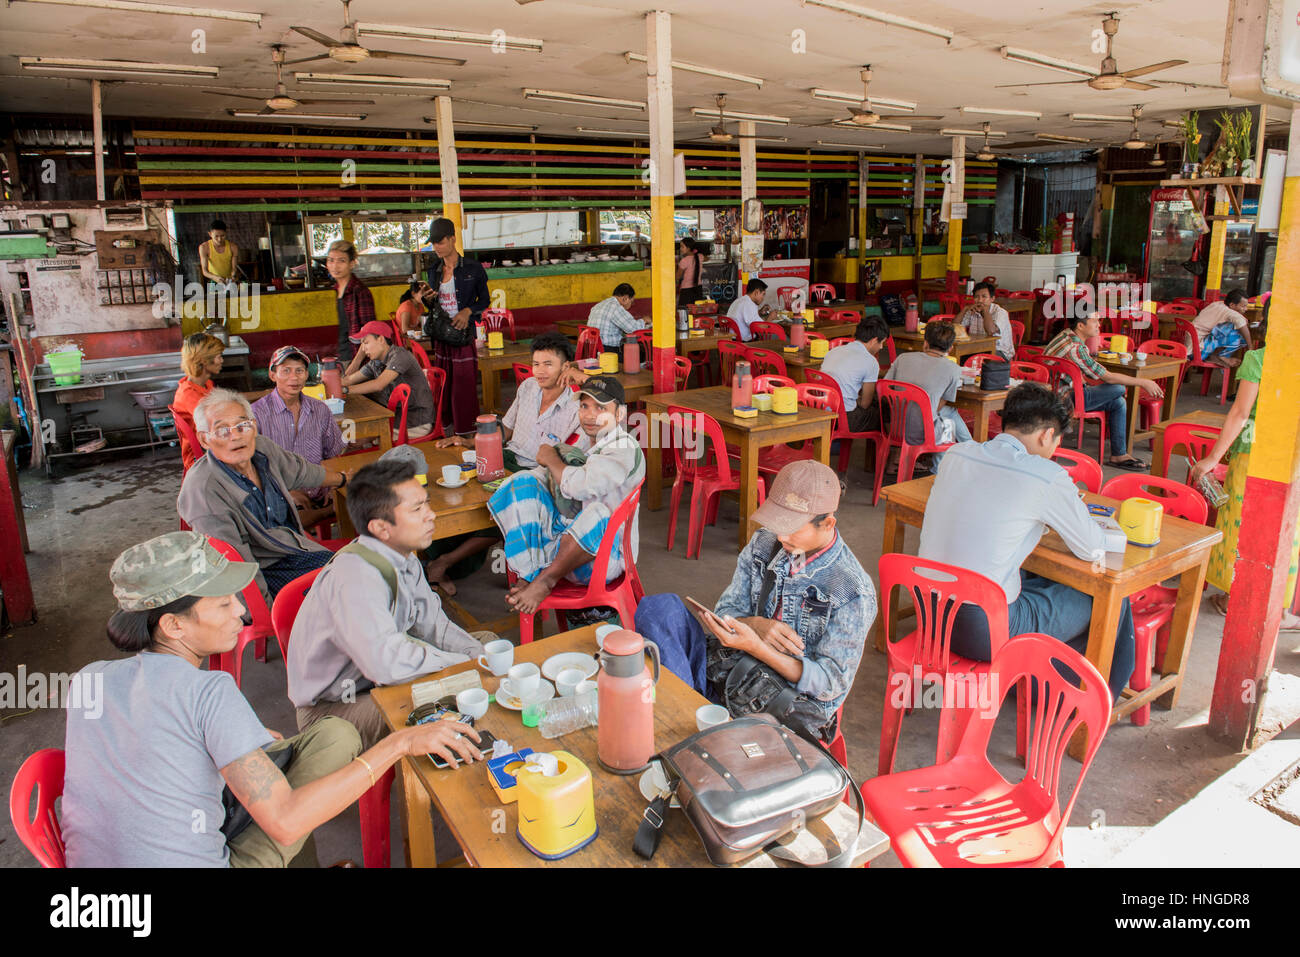 Typical scene in a tea shop in Yangon with men relaxing during the daytime Stock Photo